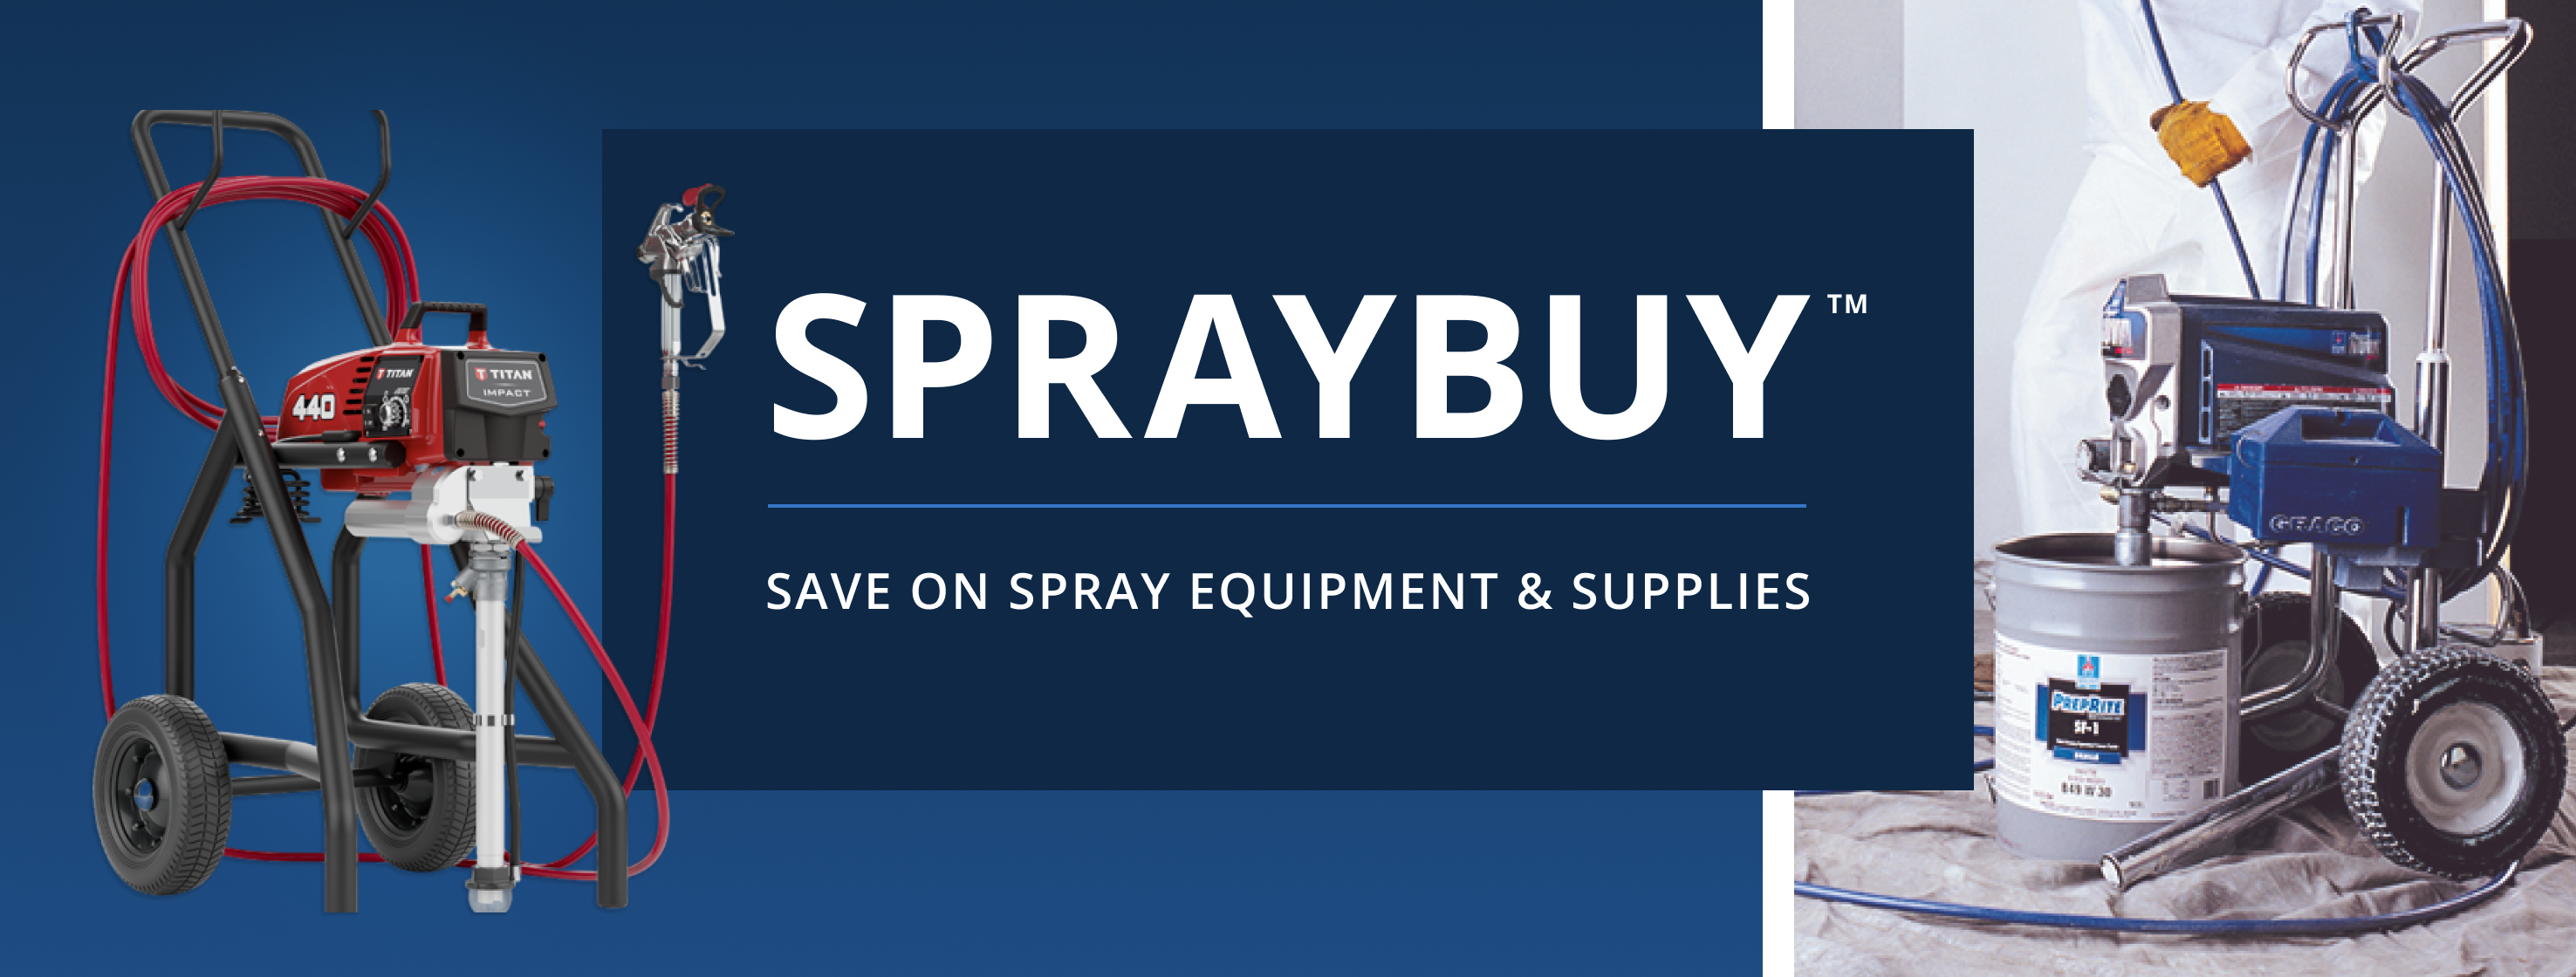 June 1st - July 31st. SprayBuy. Save on Spray Equipment and Supplies.